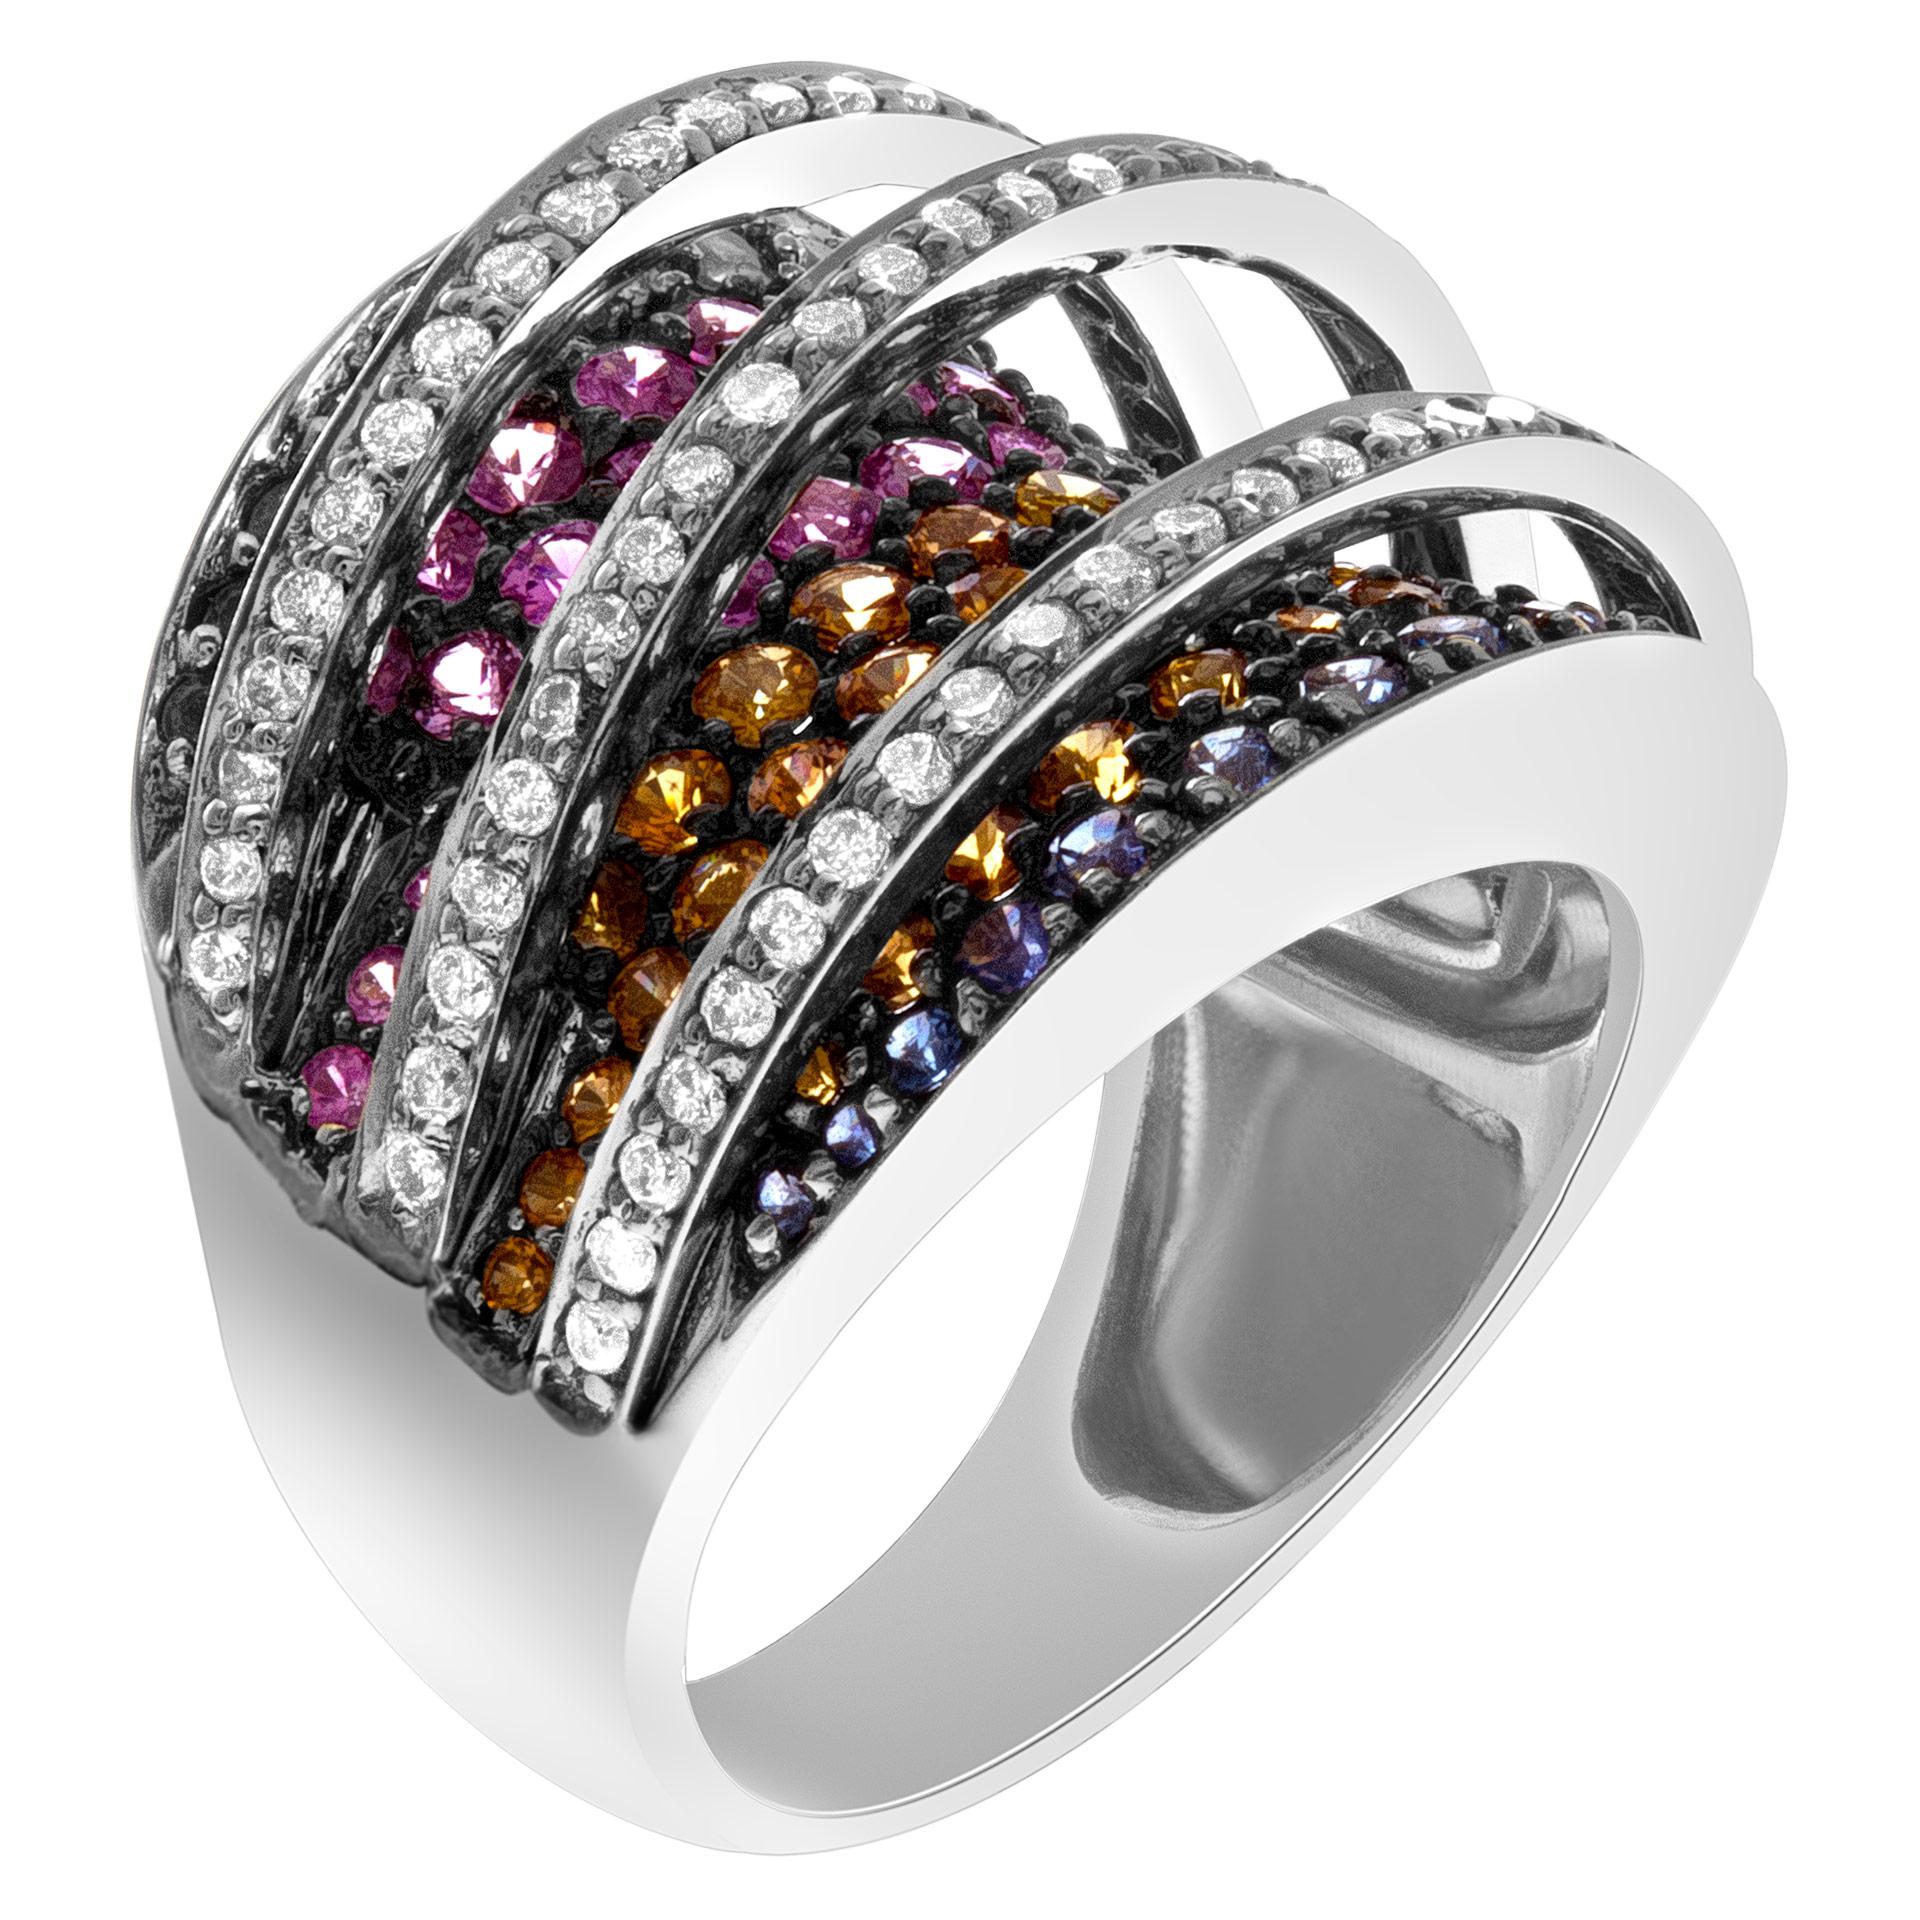 Gorgeous contemporary band of multicolor sapphires & diamonds set 18k white gold. Size 4.  This Diamond/Sapphires ring is currently size 4 and some items can be sized up or down, please ask! It weighs 7.6 pennyweights and is 18k White Gold.
